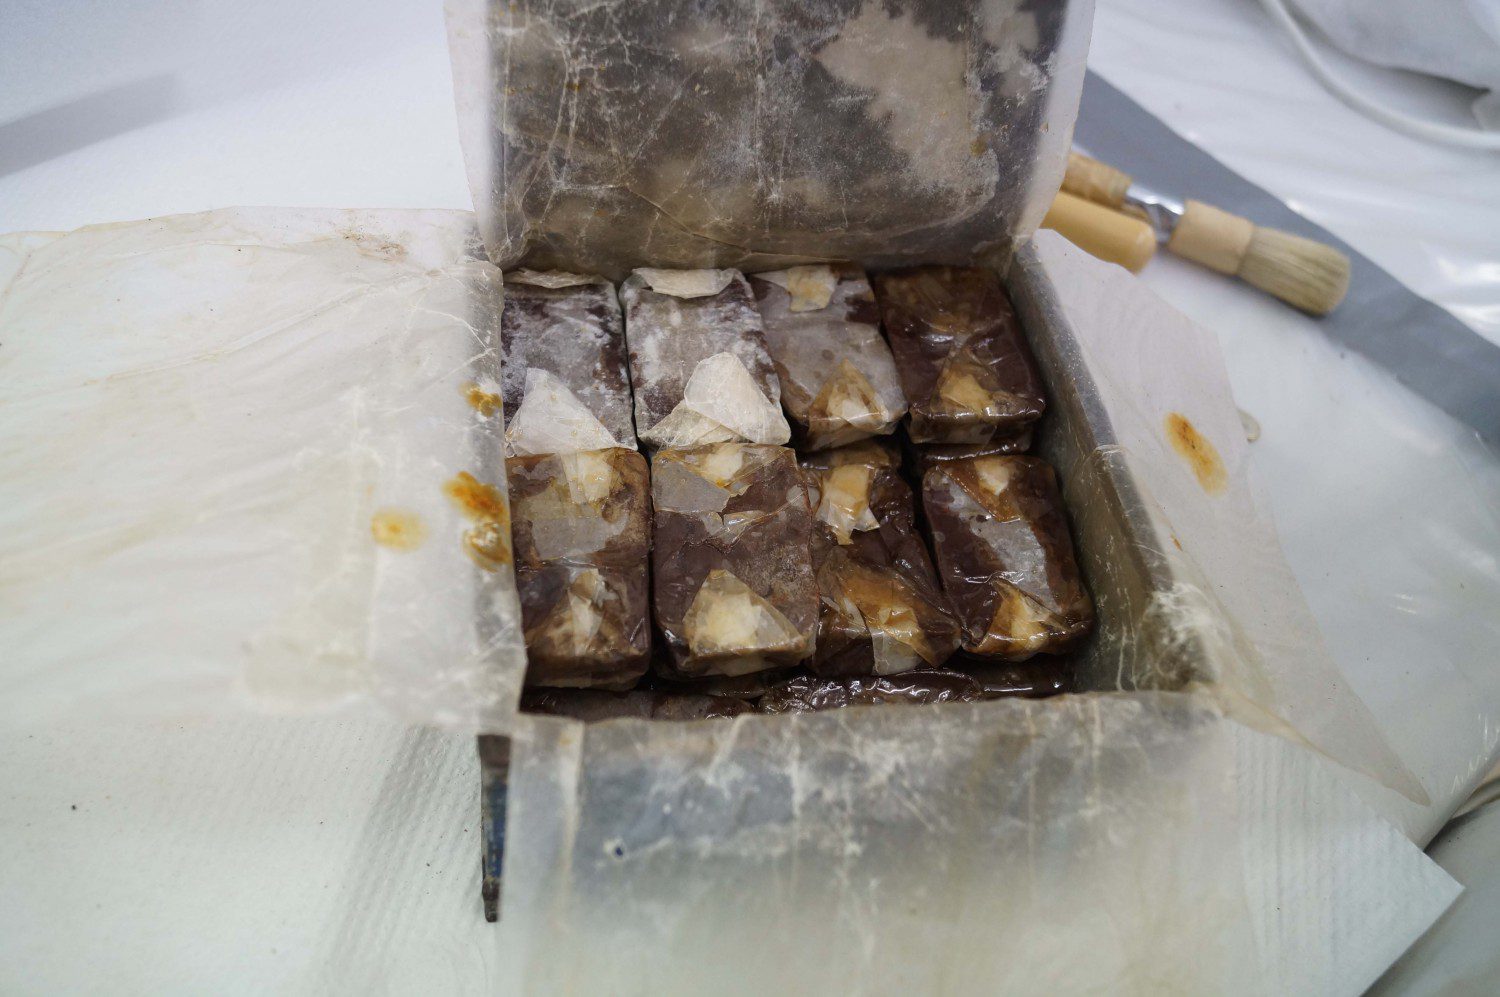 Repacking the Lime Juice Nodules into the tin after treatment ̶ as the chocolate threatened to melt at room temperature, treatment had to be carried out in short bursts between periods of cold storage.